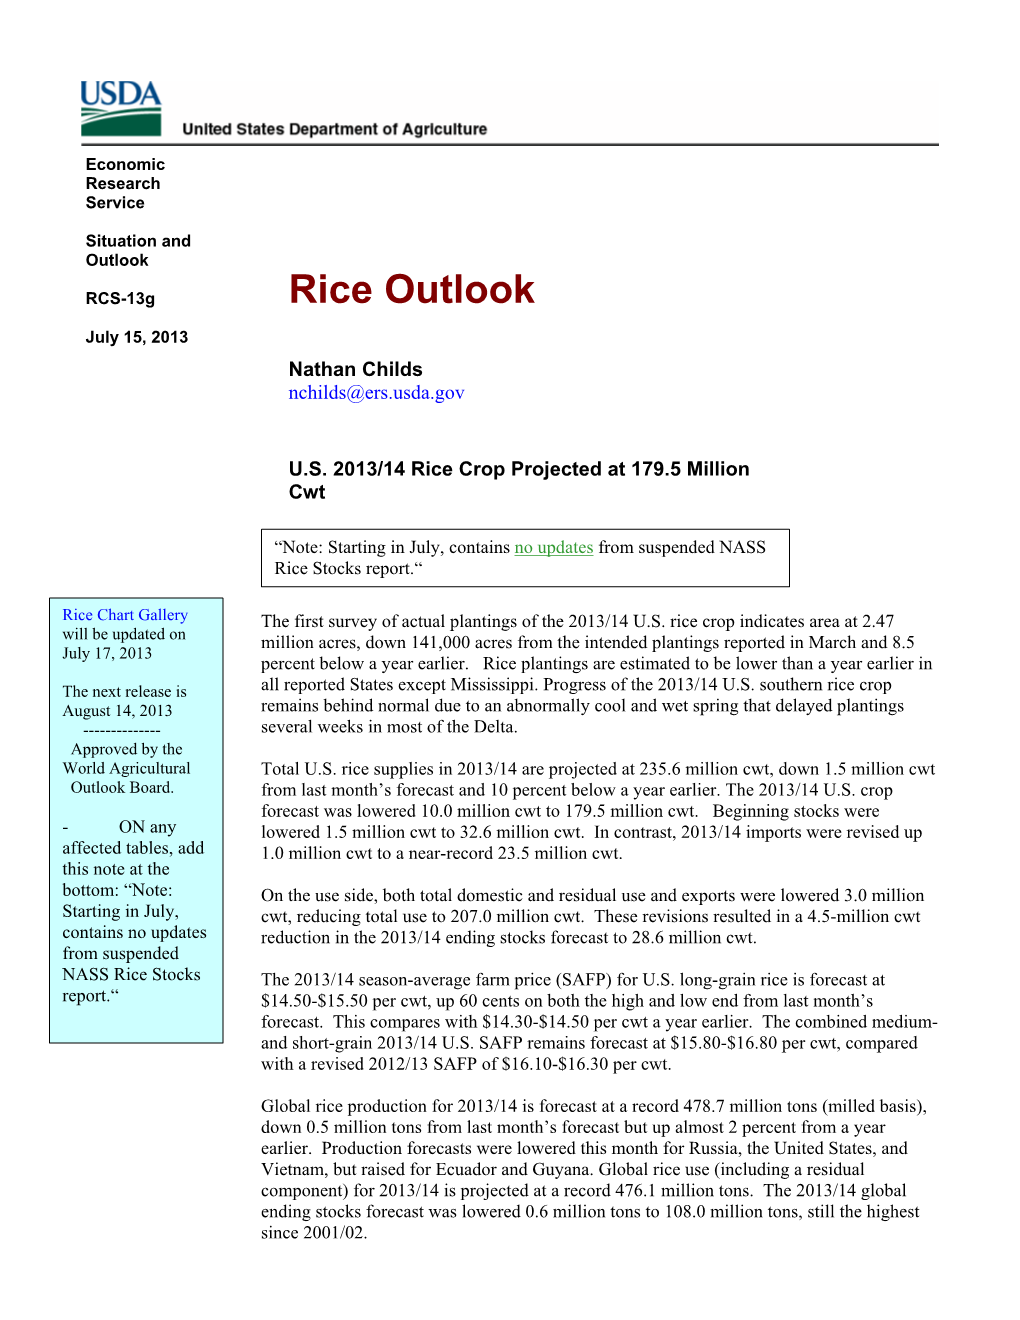 Rice Outlook